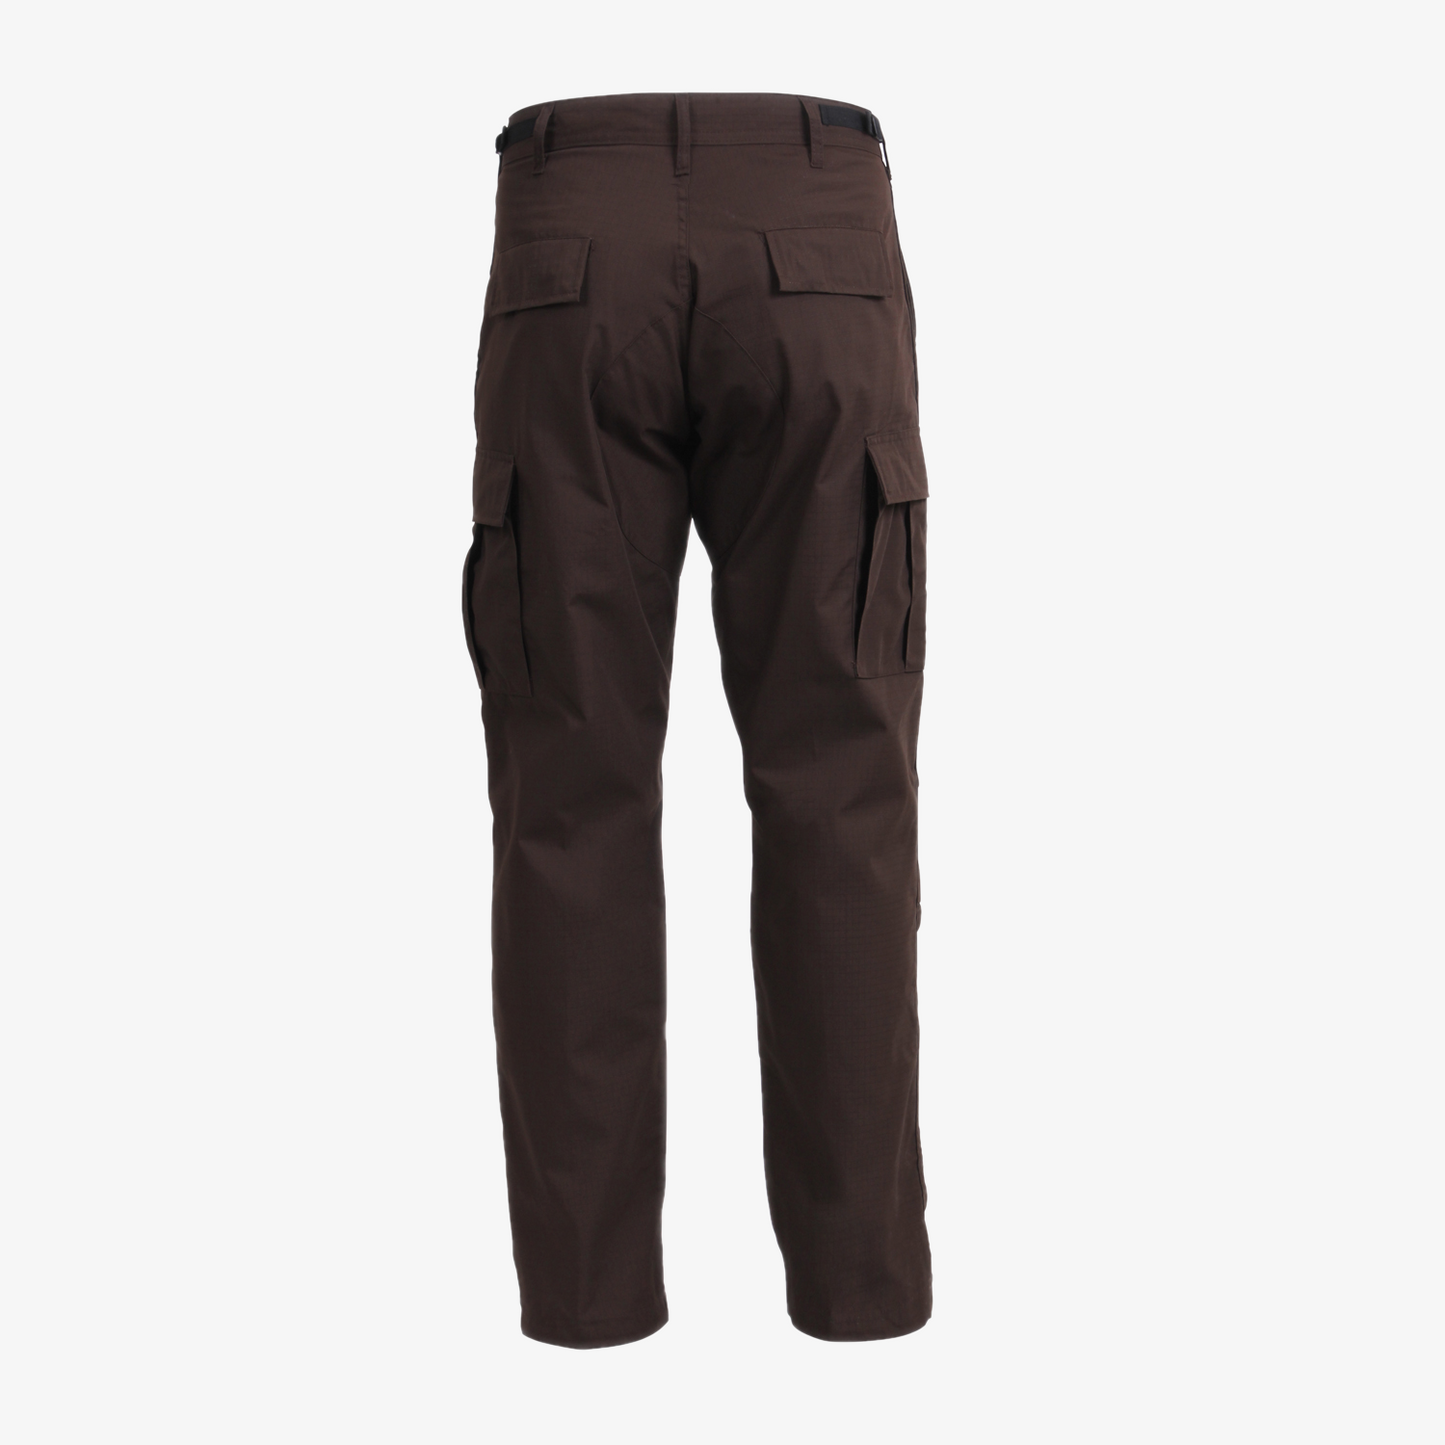 Rothco - SWAT Cloth BDU Pants, Color: Brown, Size: L ( 35'-39')